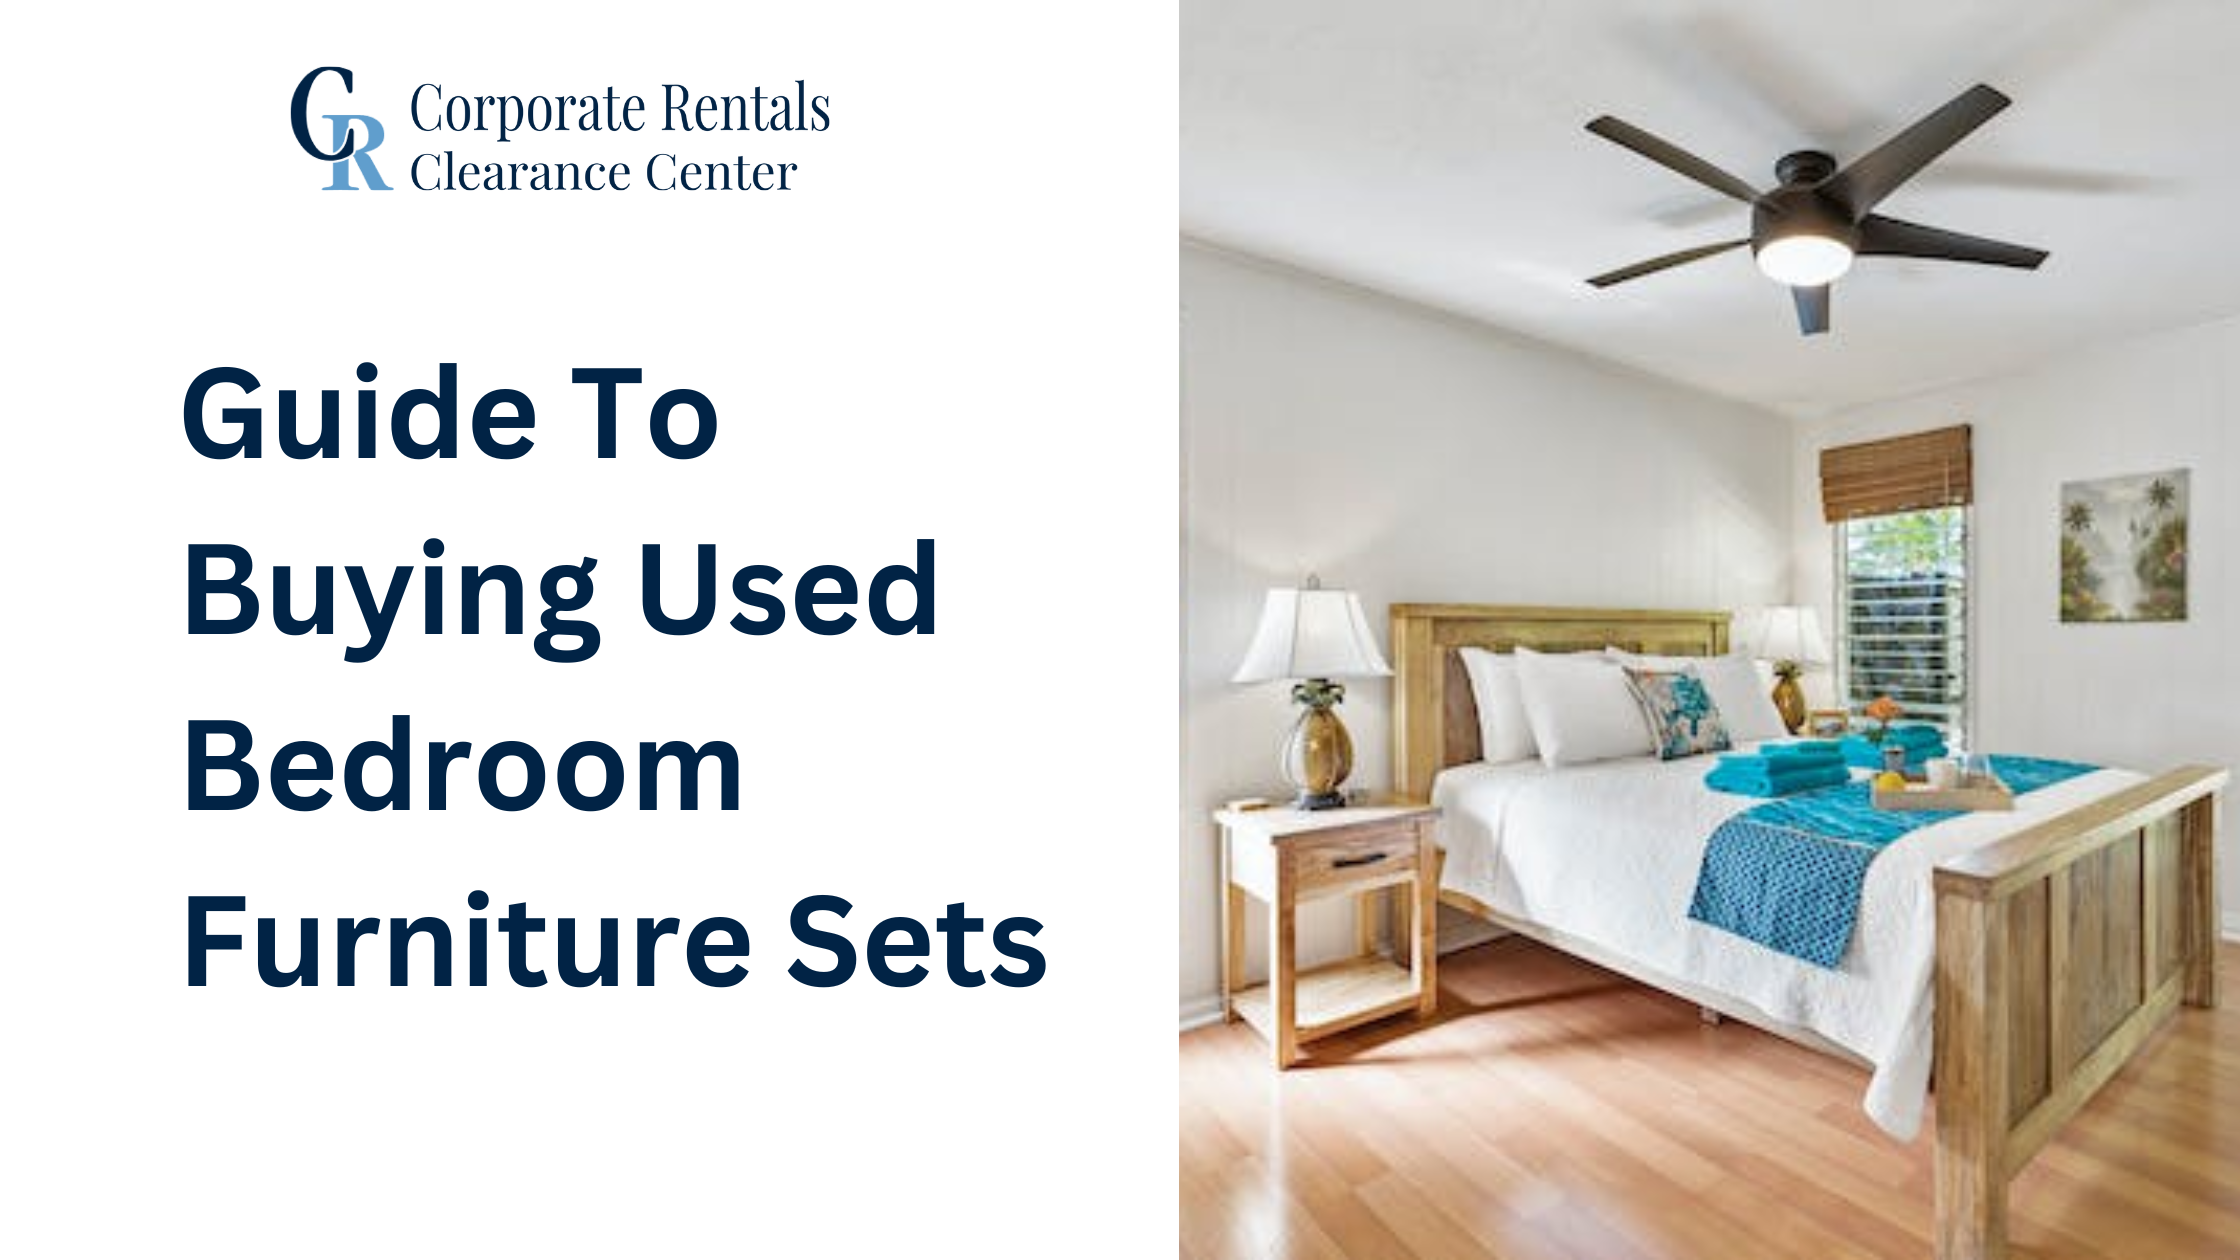 Guide to Buying Used Bedroom Furniture Sets